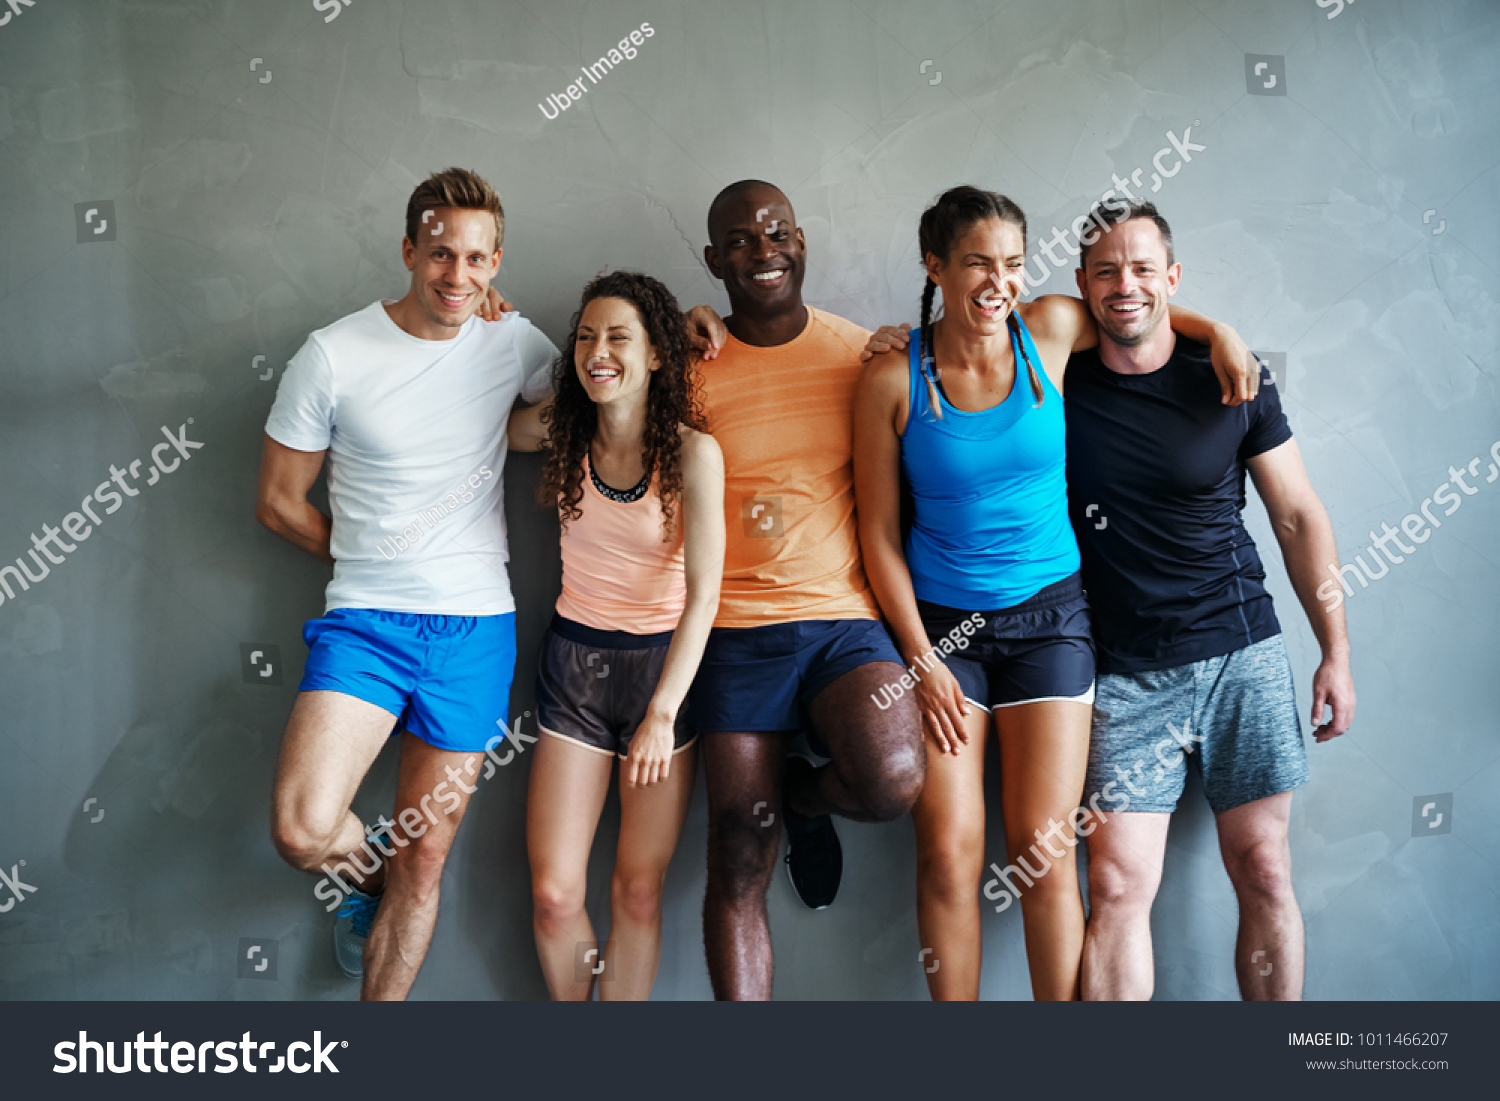 Smiling group of sporty friends in sportswear laughing while standing arm in arm together against the wall of a gym after a workout #1011466207